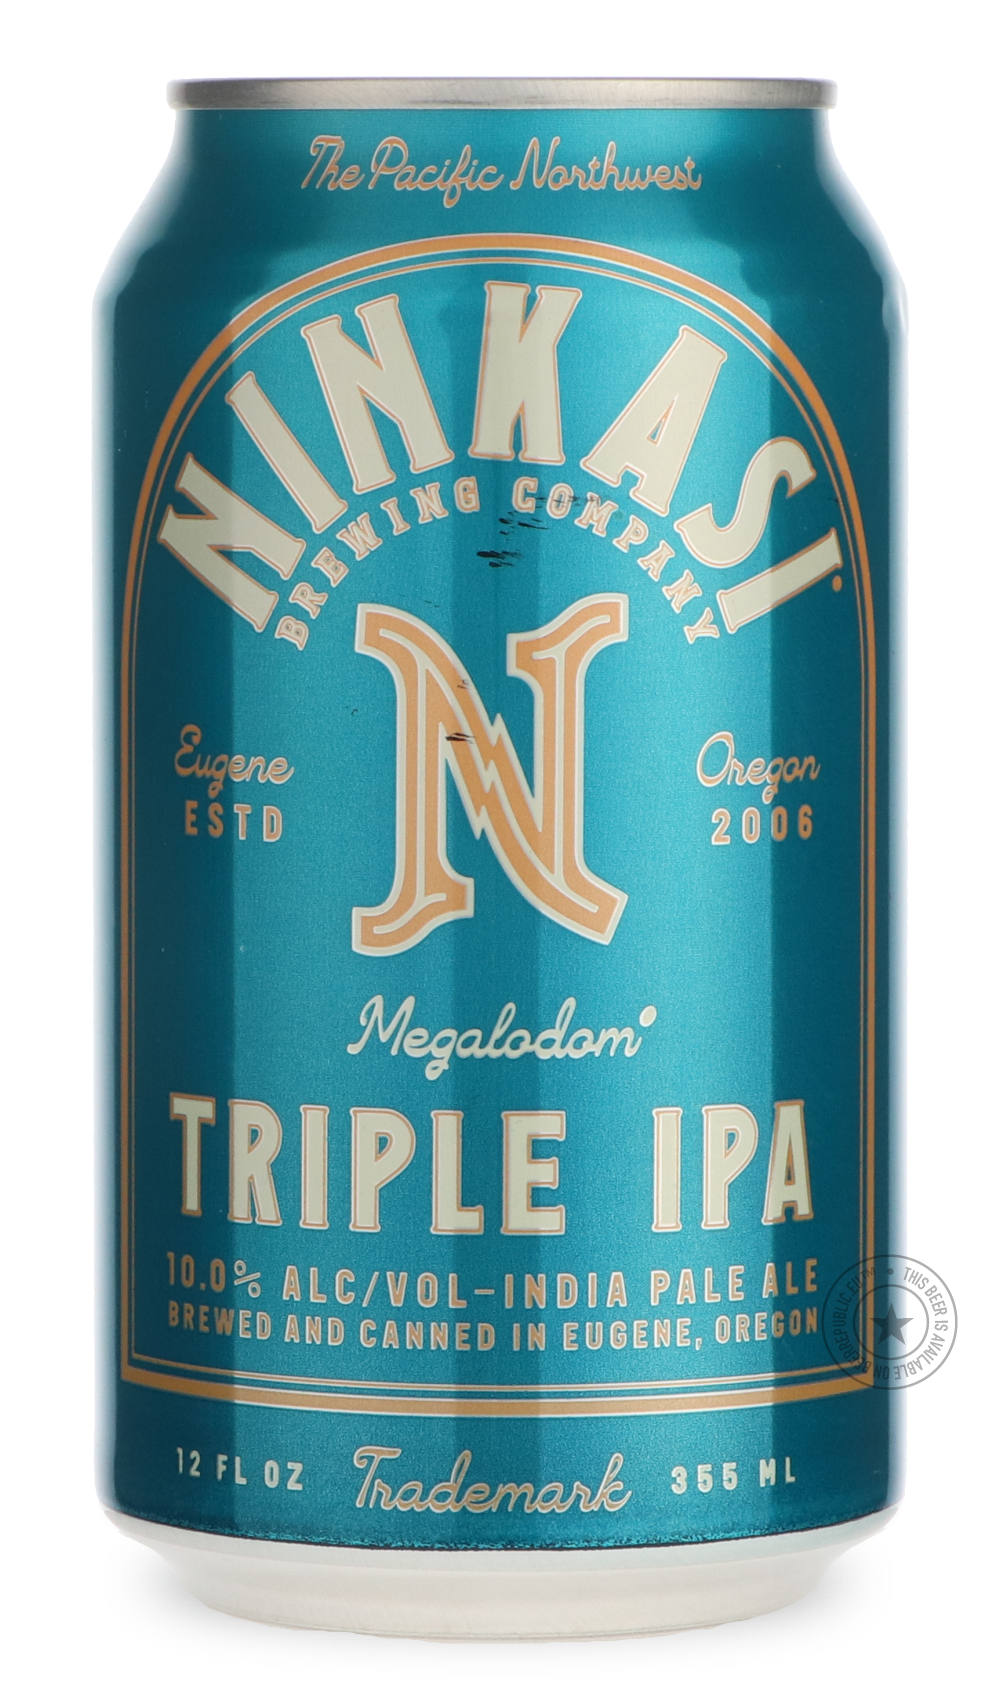 -Ninkasi- Megalodom-IPA- Only @ Beer Republic - The best online beer store for American & Canadian craft beer - Buy beer online from the USA and Canada - Bier online kopen - Amerikaans bier kopen - Craft beer store - Craft beer kopen - Amerikanisch bier kaufen - Bier online kaufen - Acheter biere online - IPA - Stout - Porter - New England IPA - Hazy IPA - Imperial Stout - Barrel Aged - Barrel Aged Imperial Stout - Brown - Dark beer - Blond - Blonde - Pilsner - Lager - Wheat - Weizen - Amber - Barley Wine -